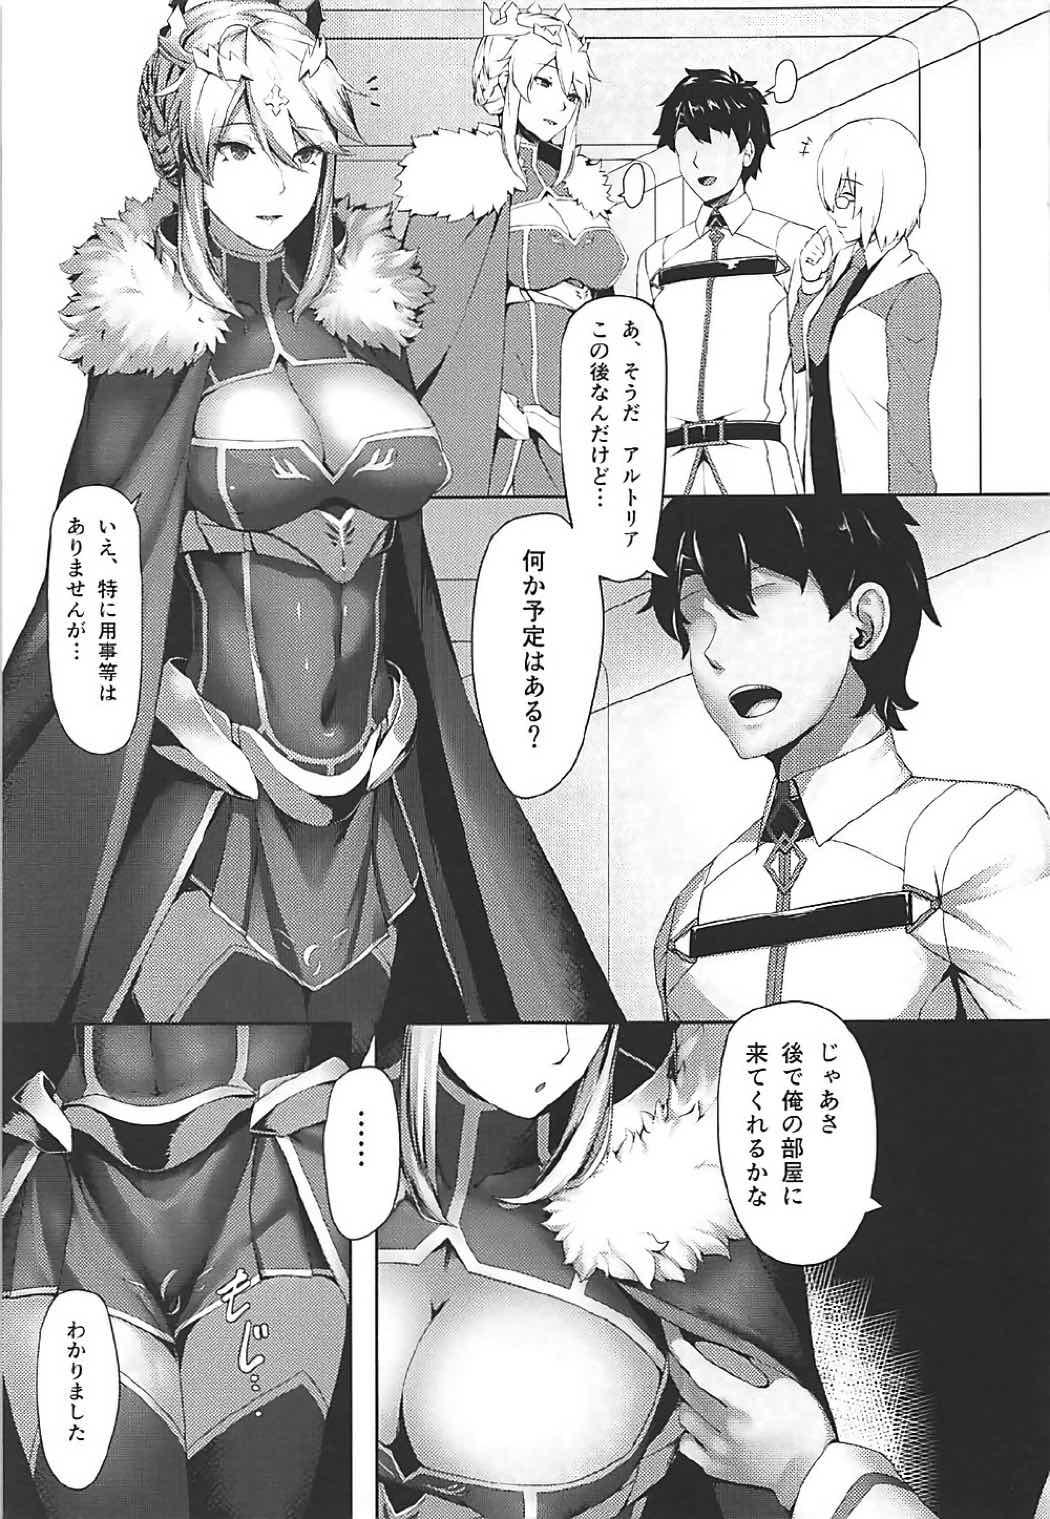 Amateur Asian What do you like? - Fate grand order Bribe - Page 2